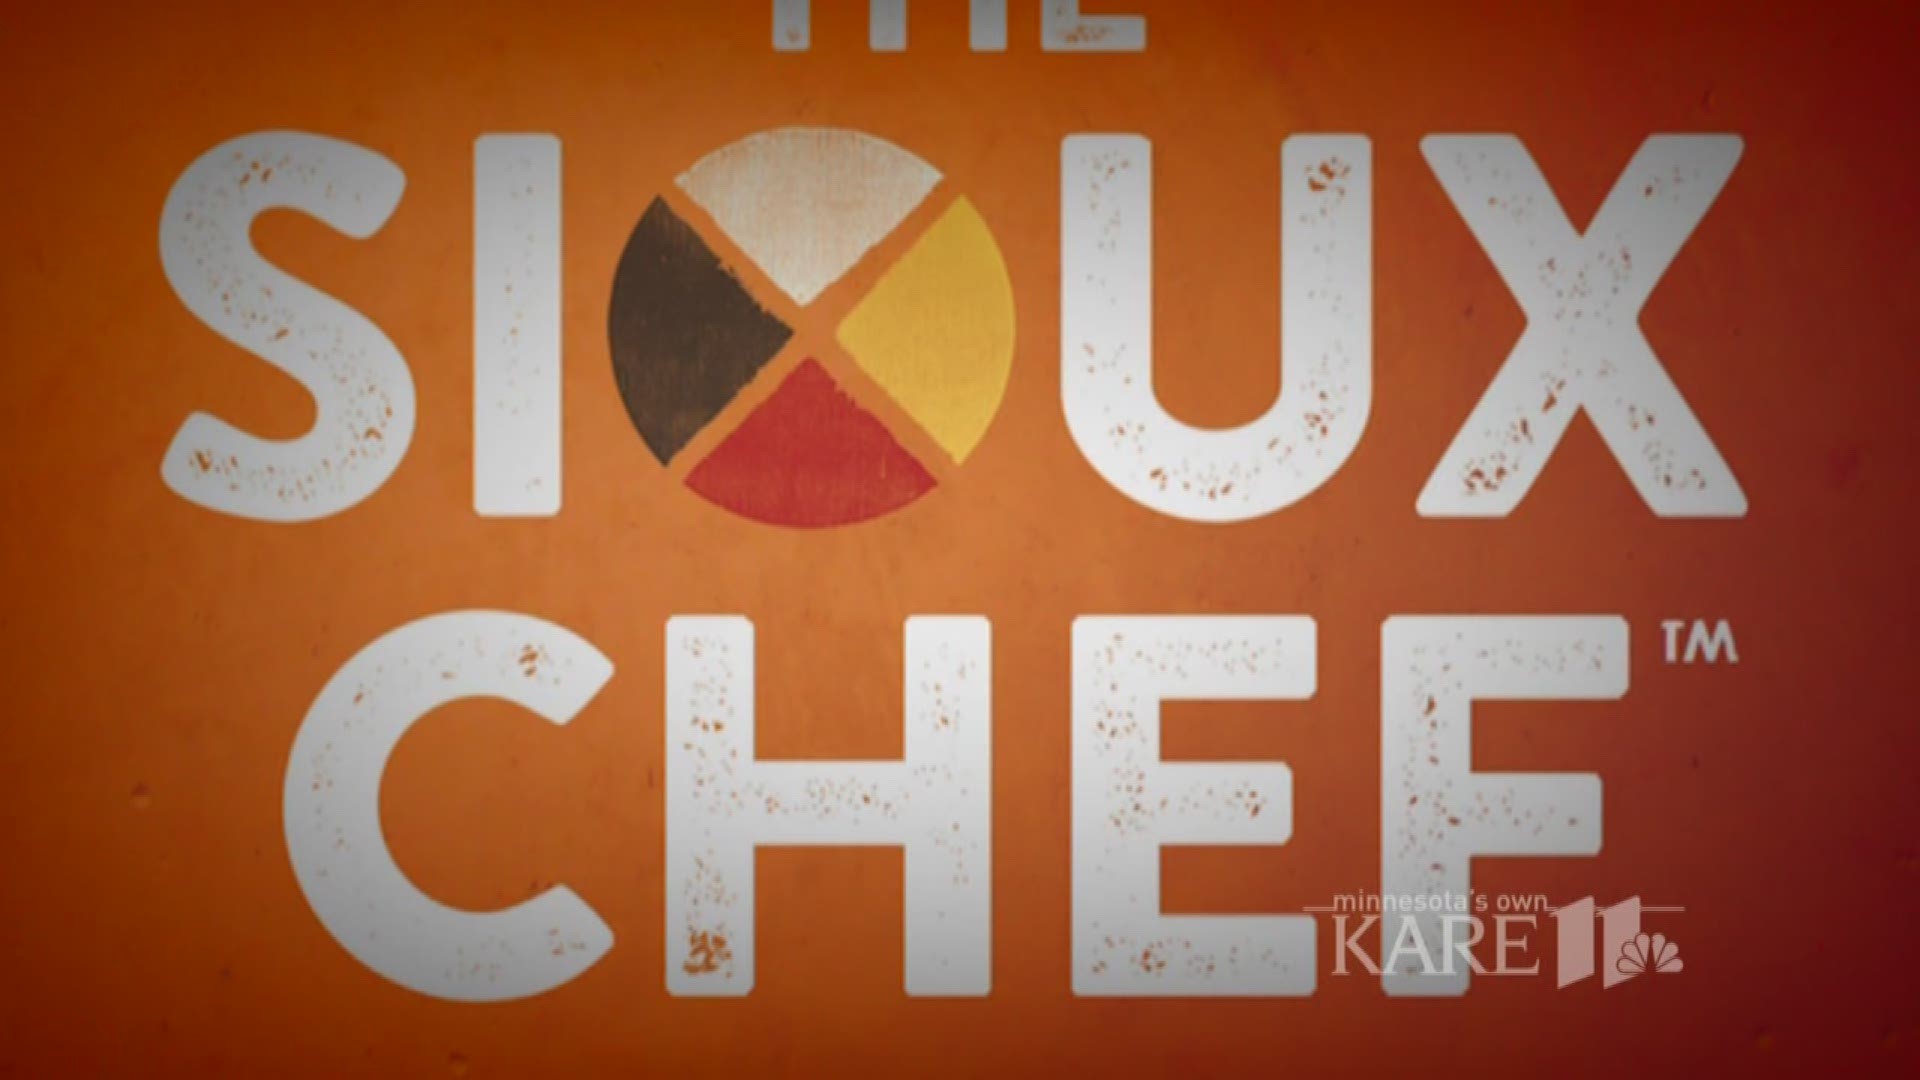 See how The Sioux Chef goes beyond serving food.